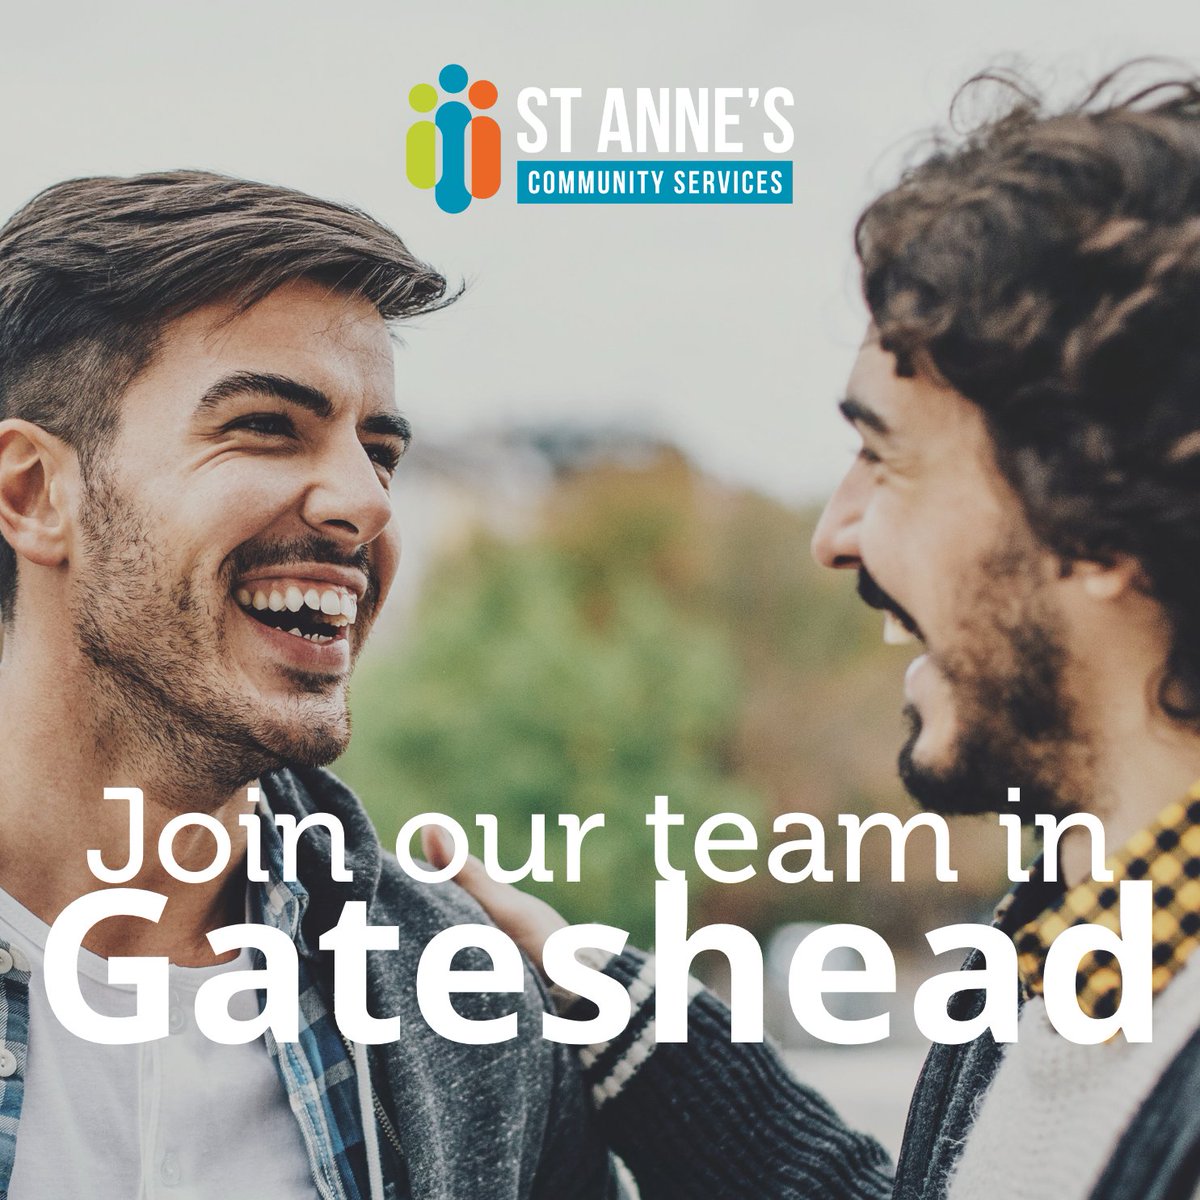 Our #Gateshead team is looking for new colleagues to join them in supporting our clients in the Low Fell area. If you would like a career in care, and work with an amazing, supportive, and caring team, click here: tinyurl.com/23yxeee3 #care #support #charity #employment #job